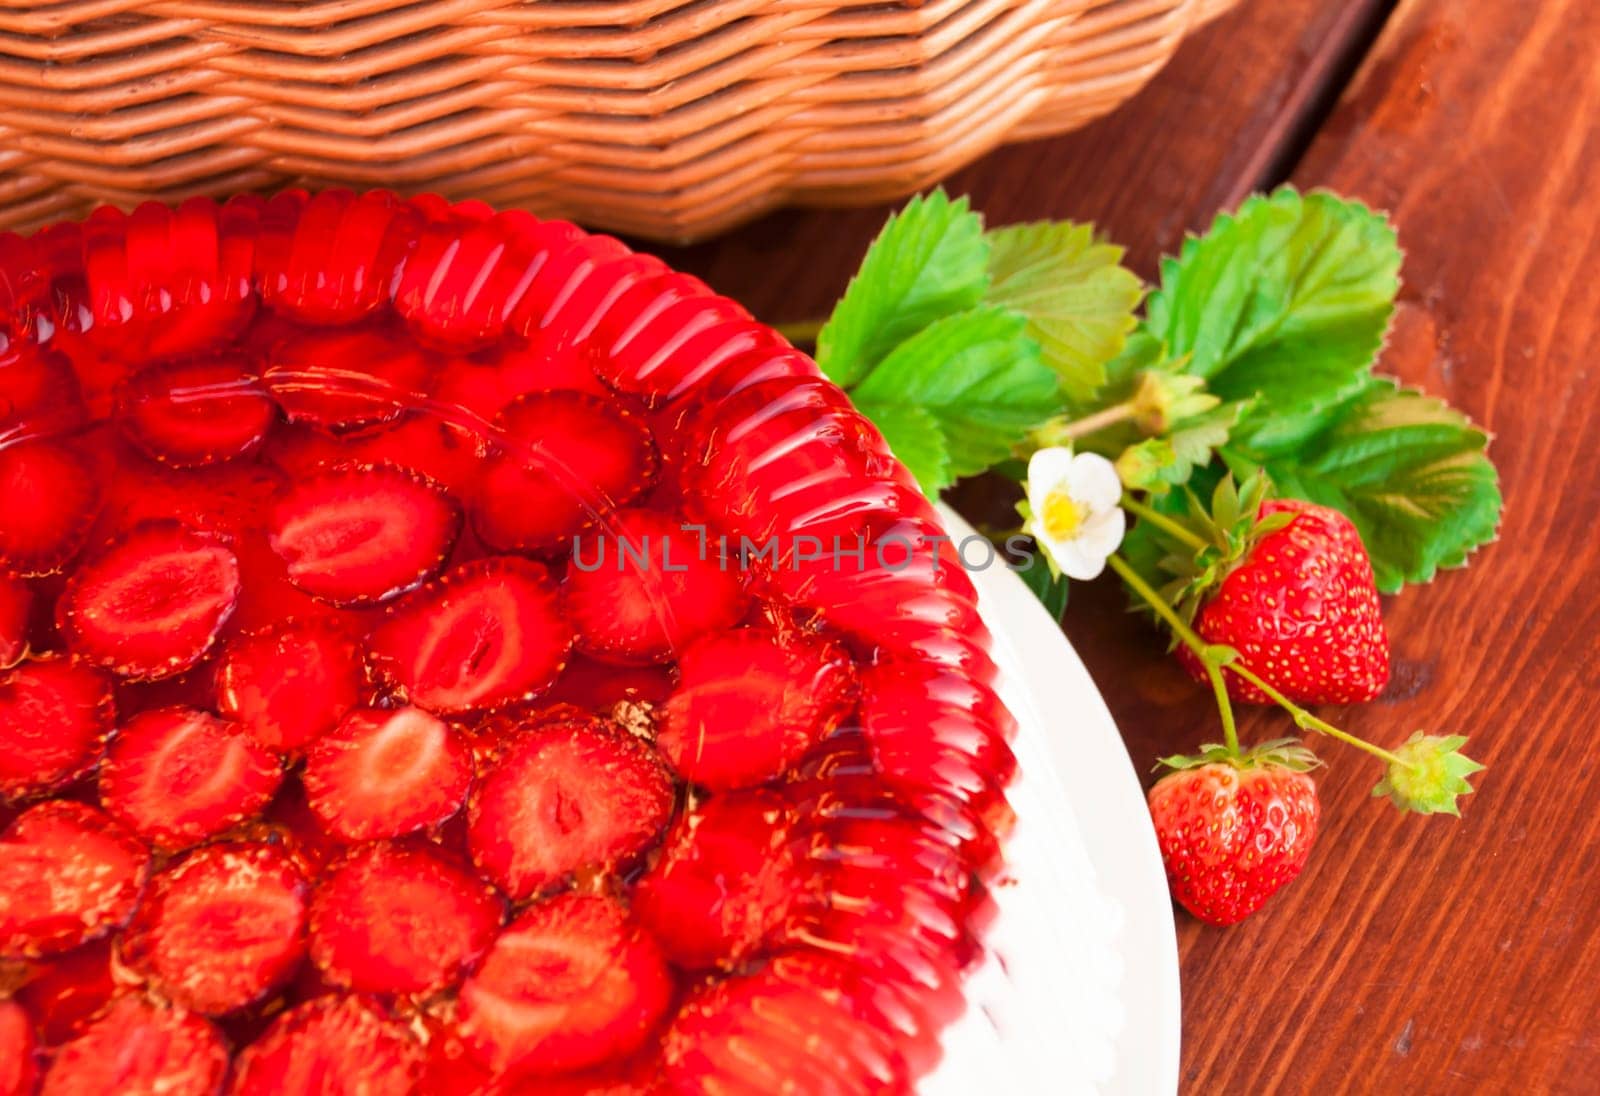 Village life. Summer period. Cake with strawberries and whipped cream decorated with leaves on wooden background by aprilphoto